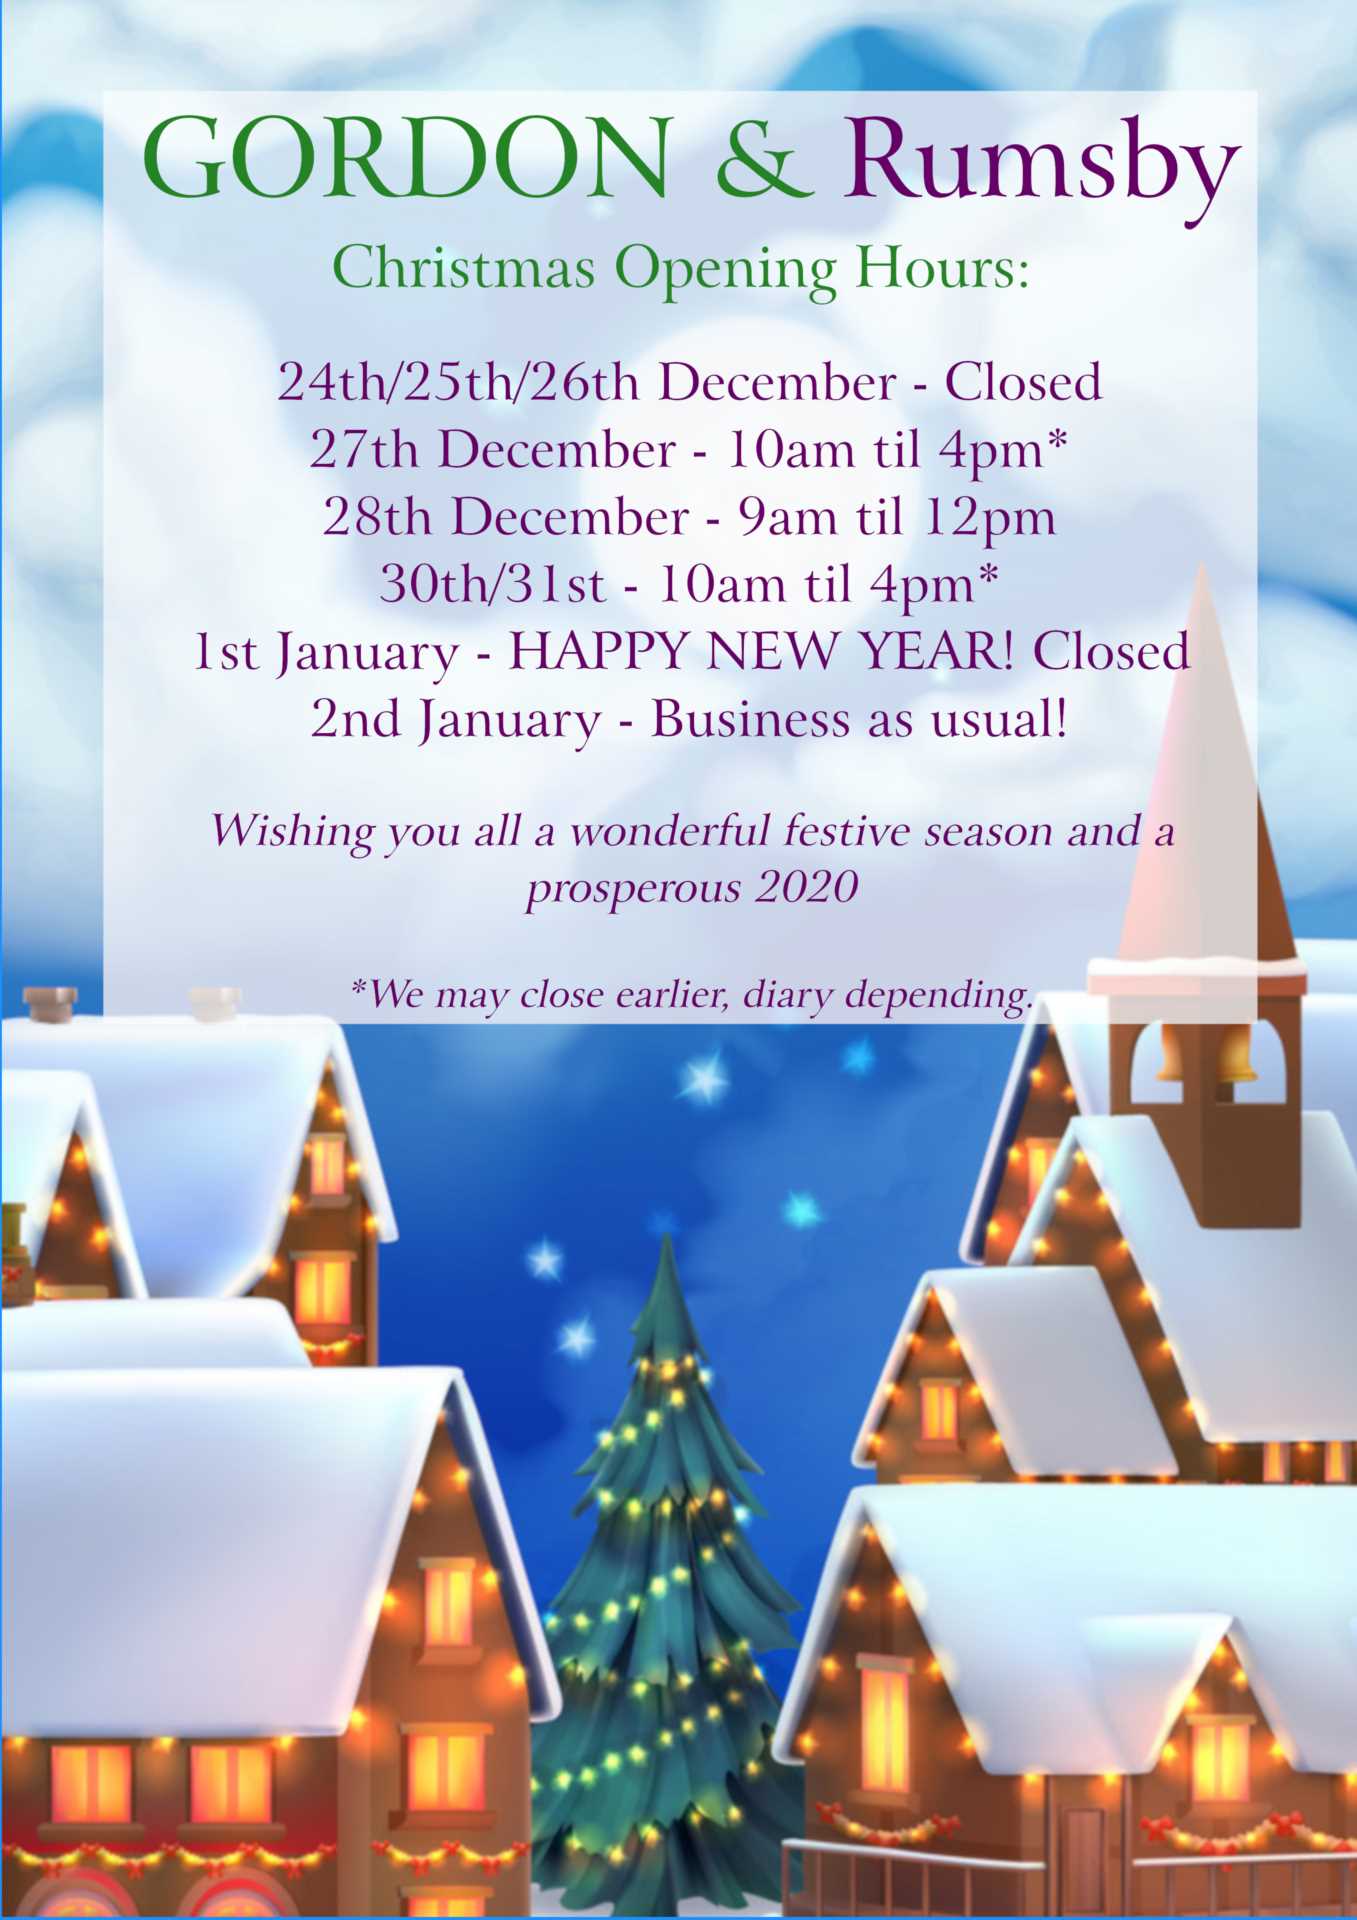 Christmas Opening Hours 2019!